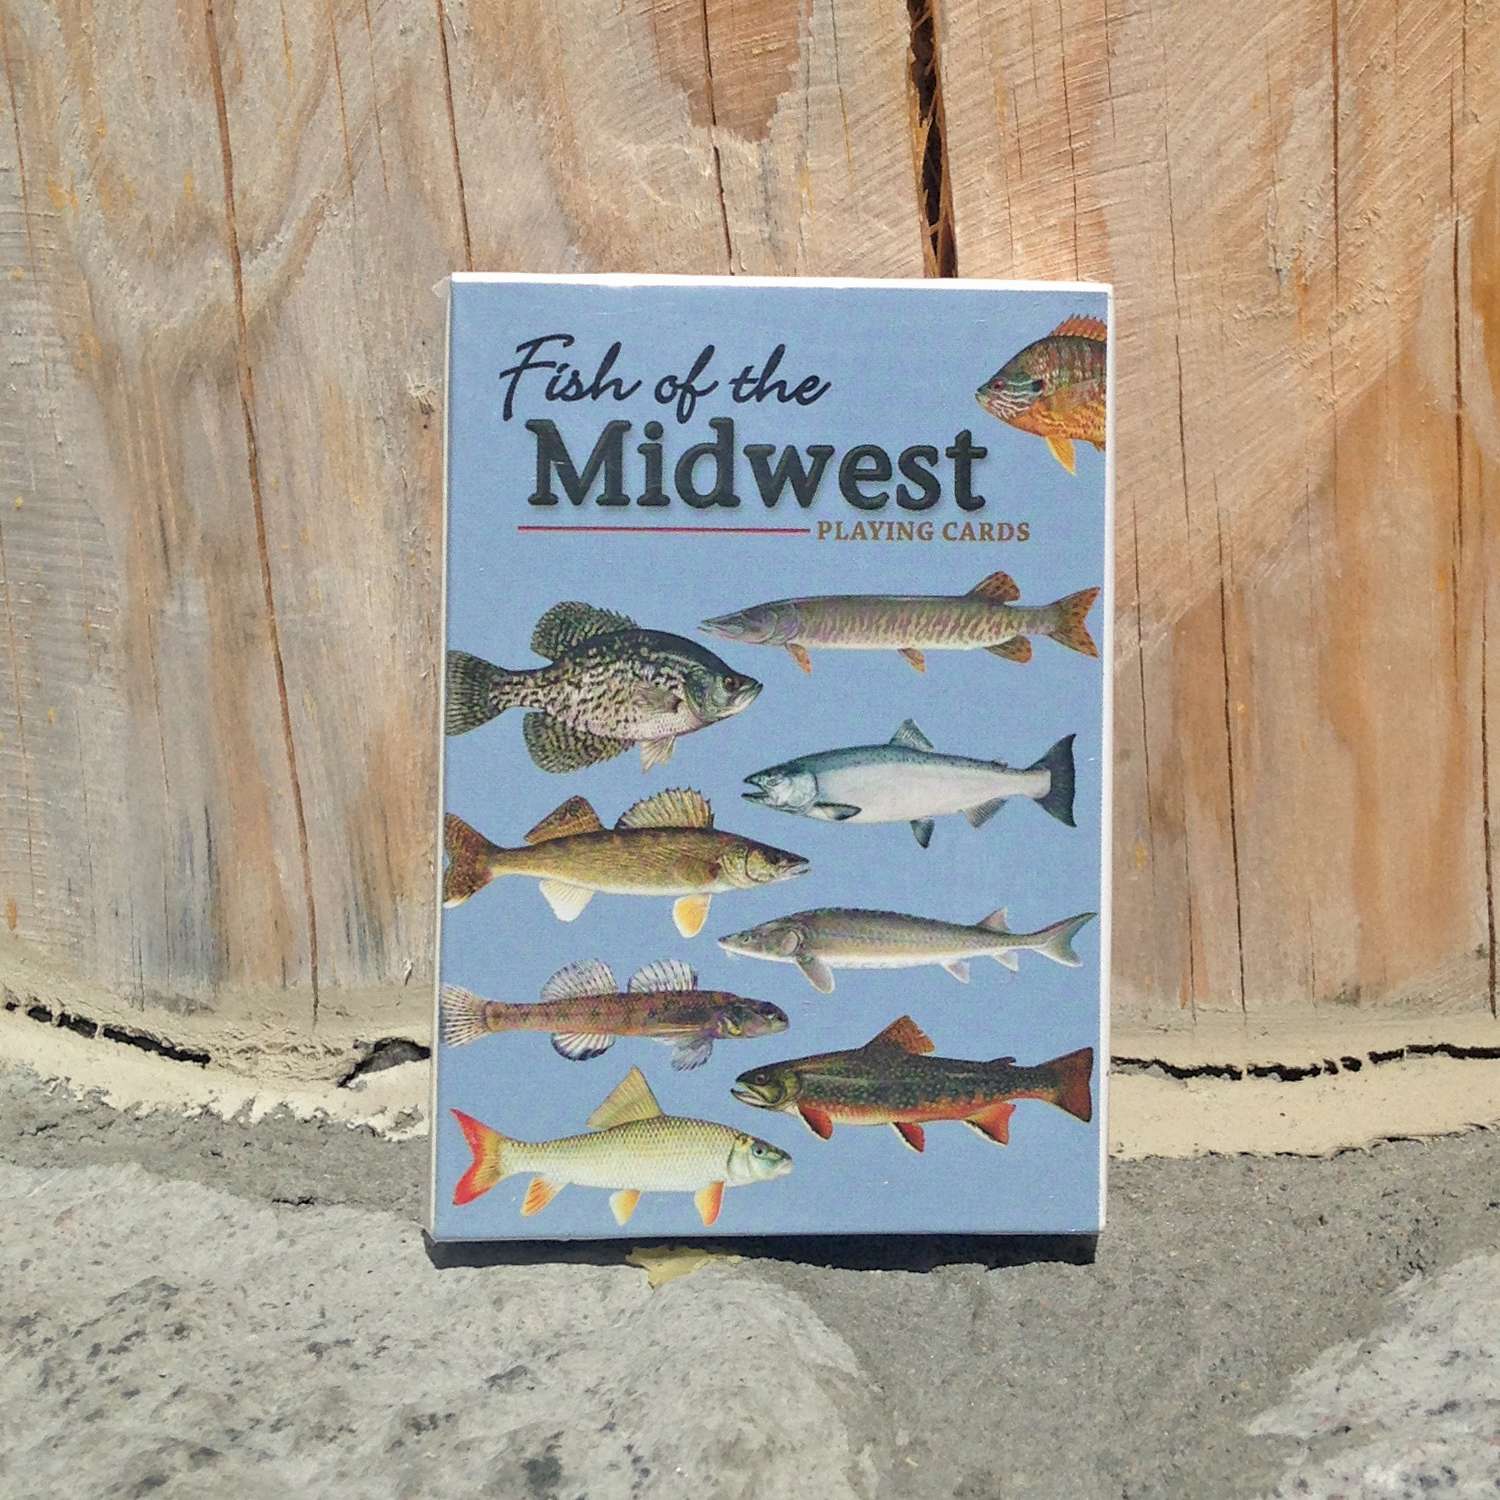 https://store.bear.org/wp-content/uploads/2018/11/fish-of-midwest-cards.jpg